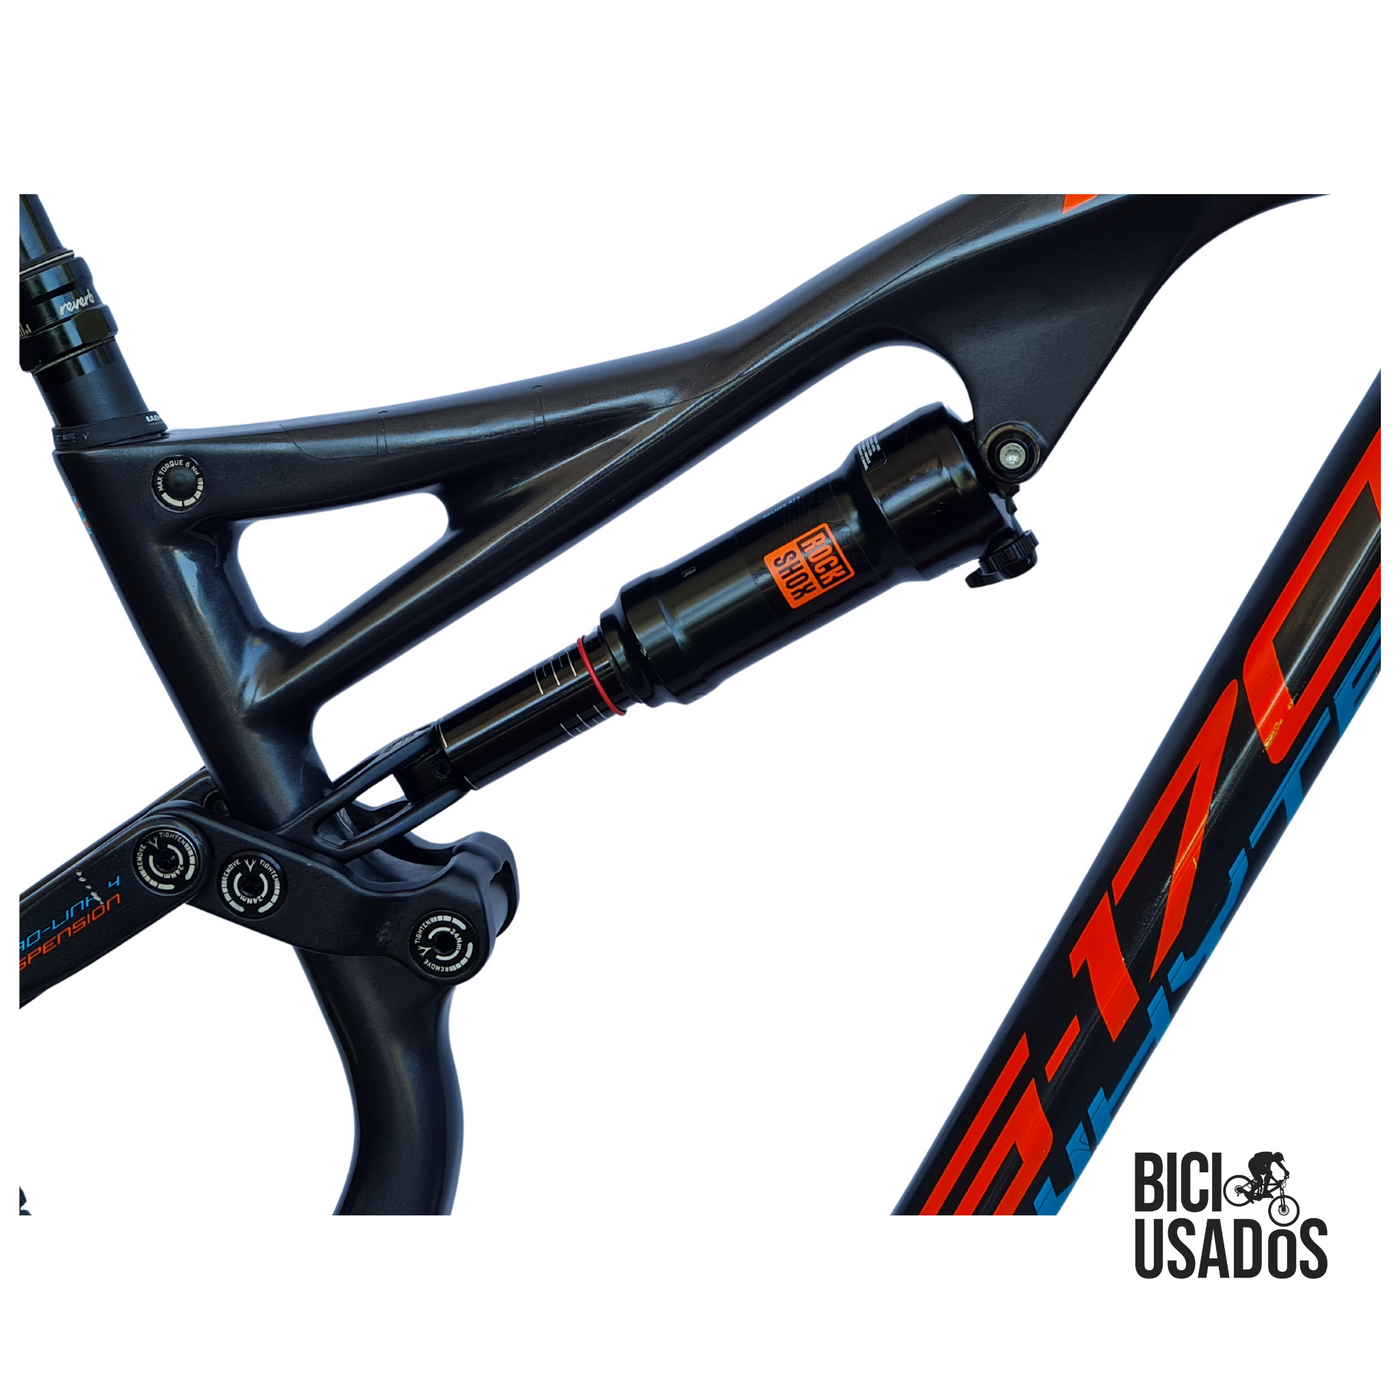 Whyte - G170 RS (2019)